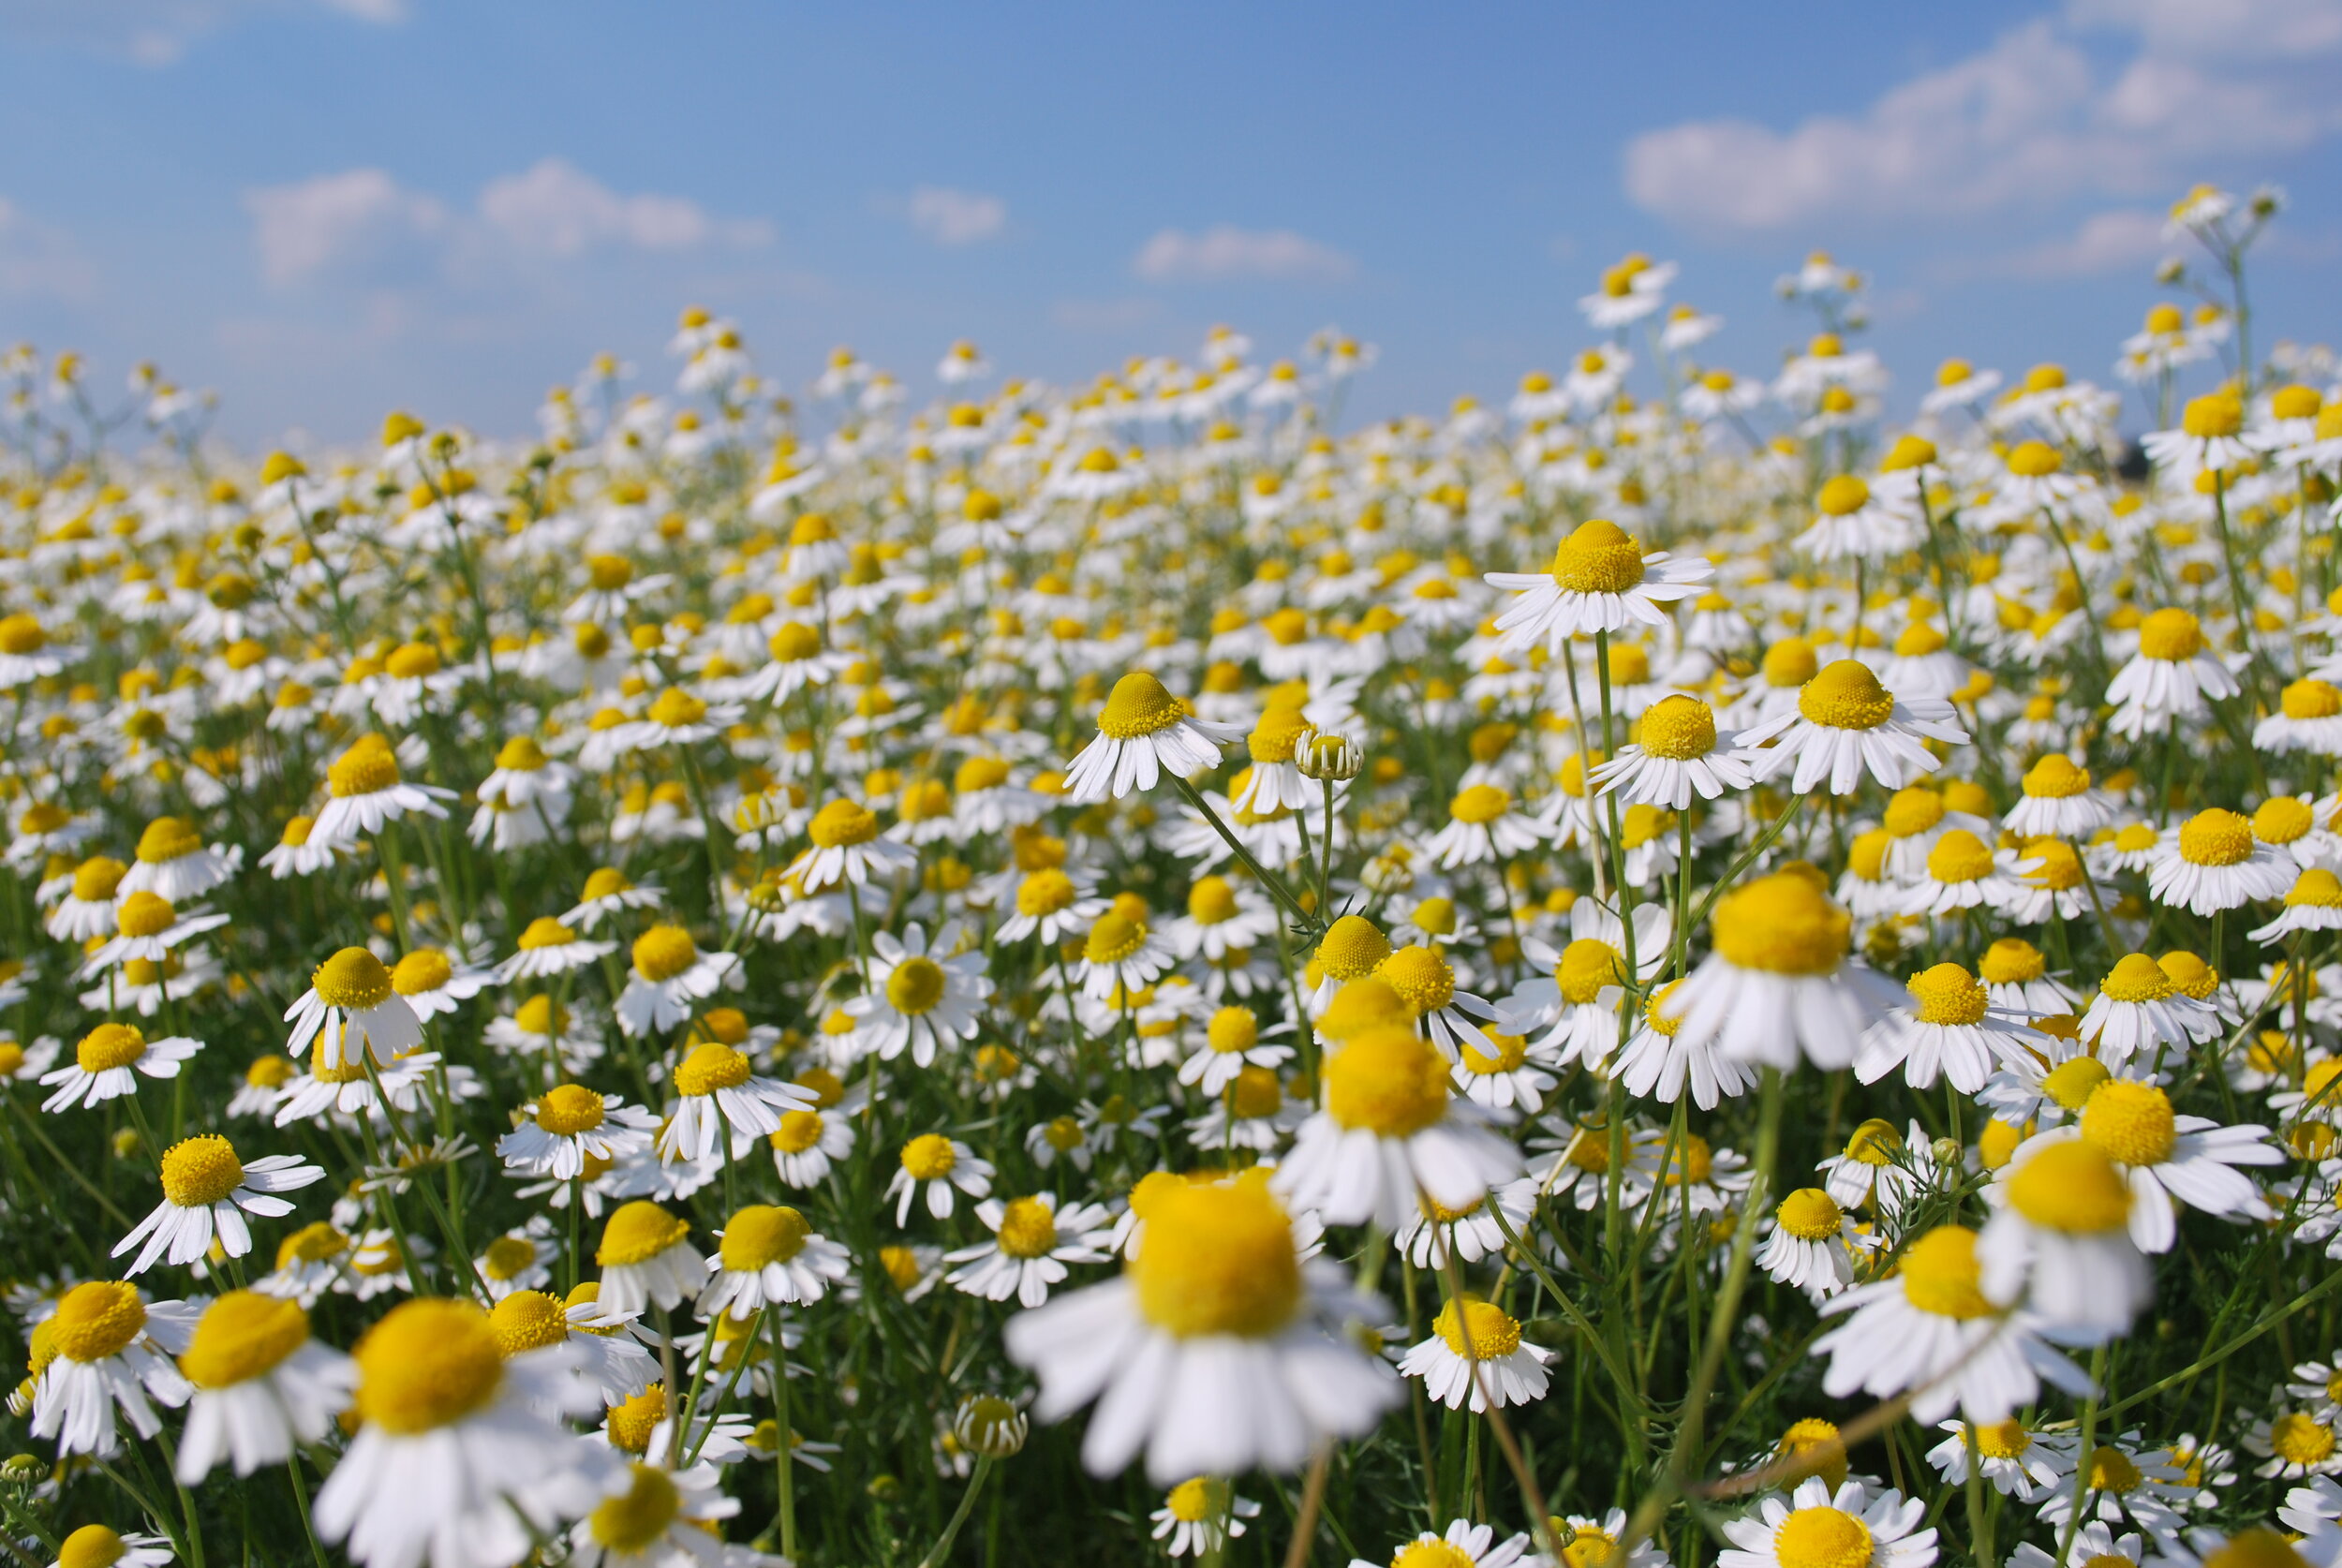 Chamomile Farming: Earn up to Rs 2.5 lakhs Profit per Hectare in 25 Days